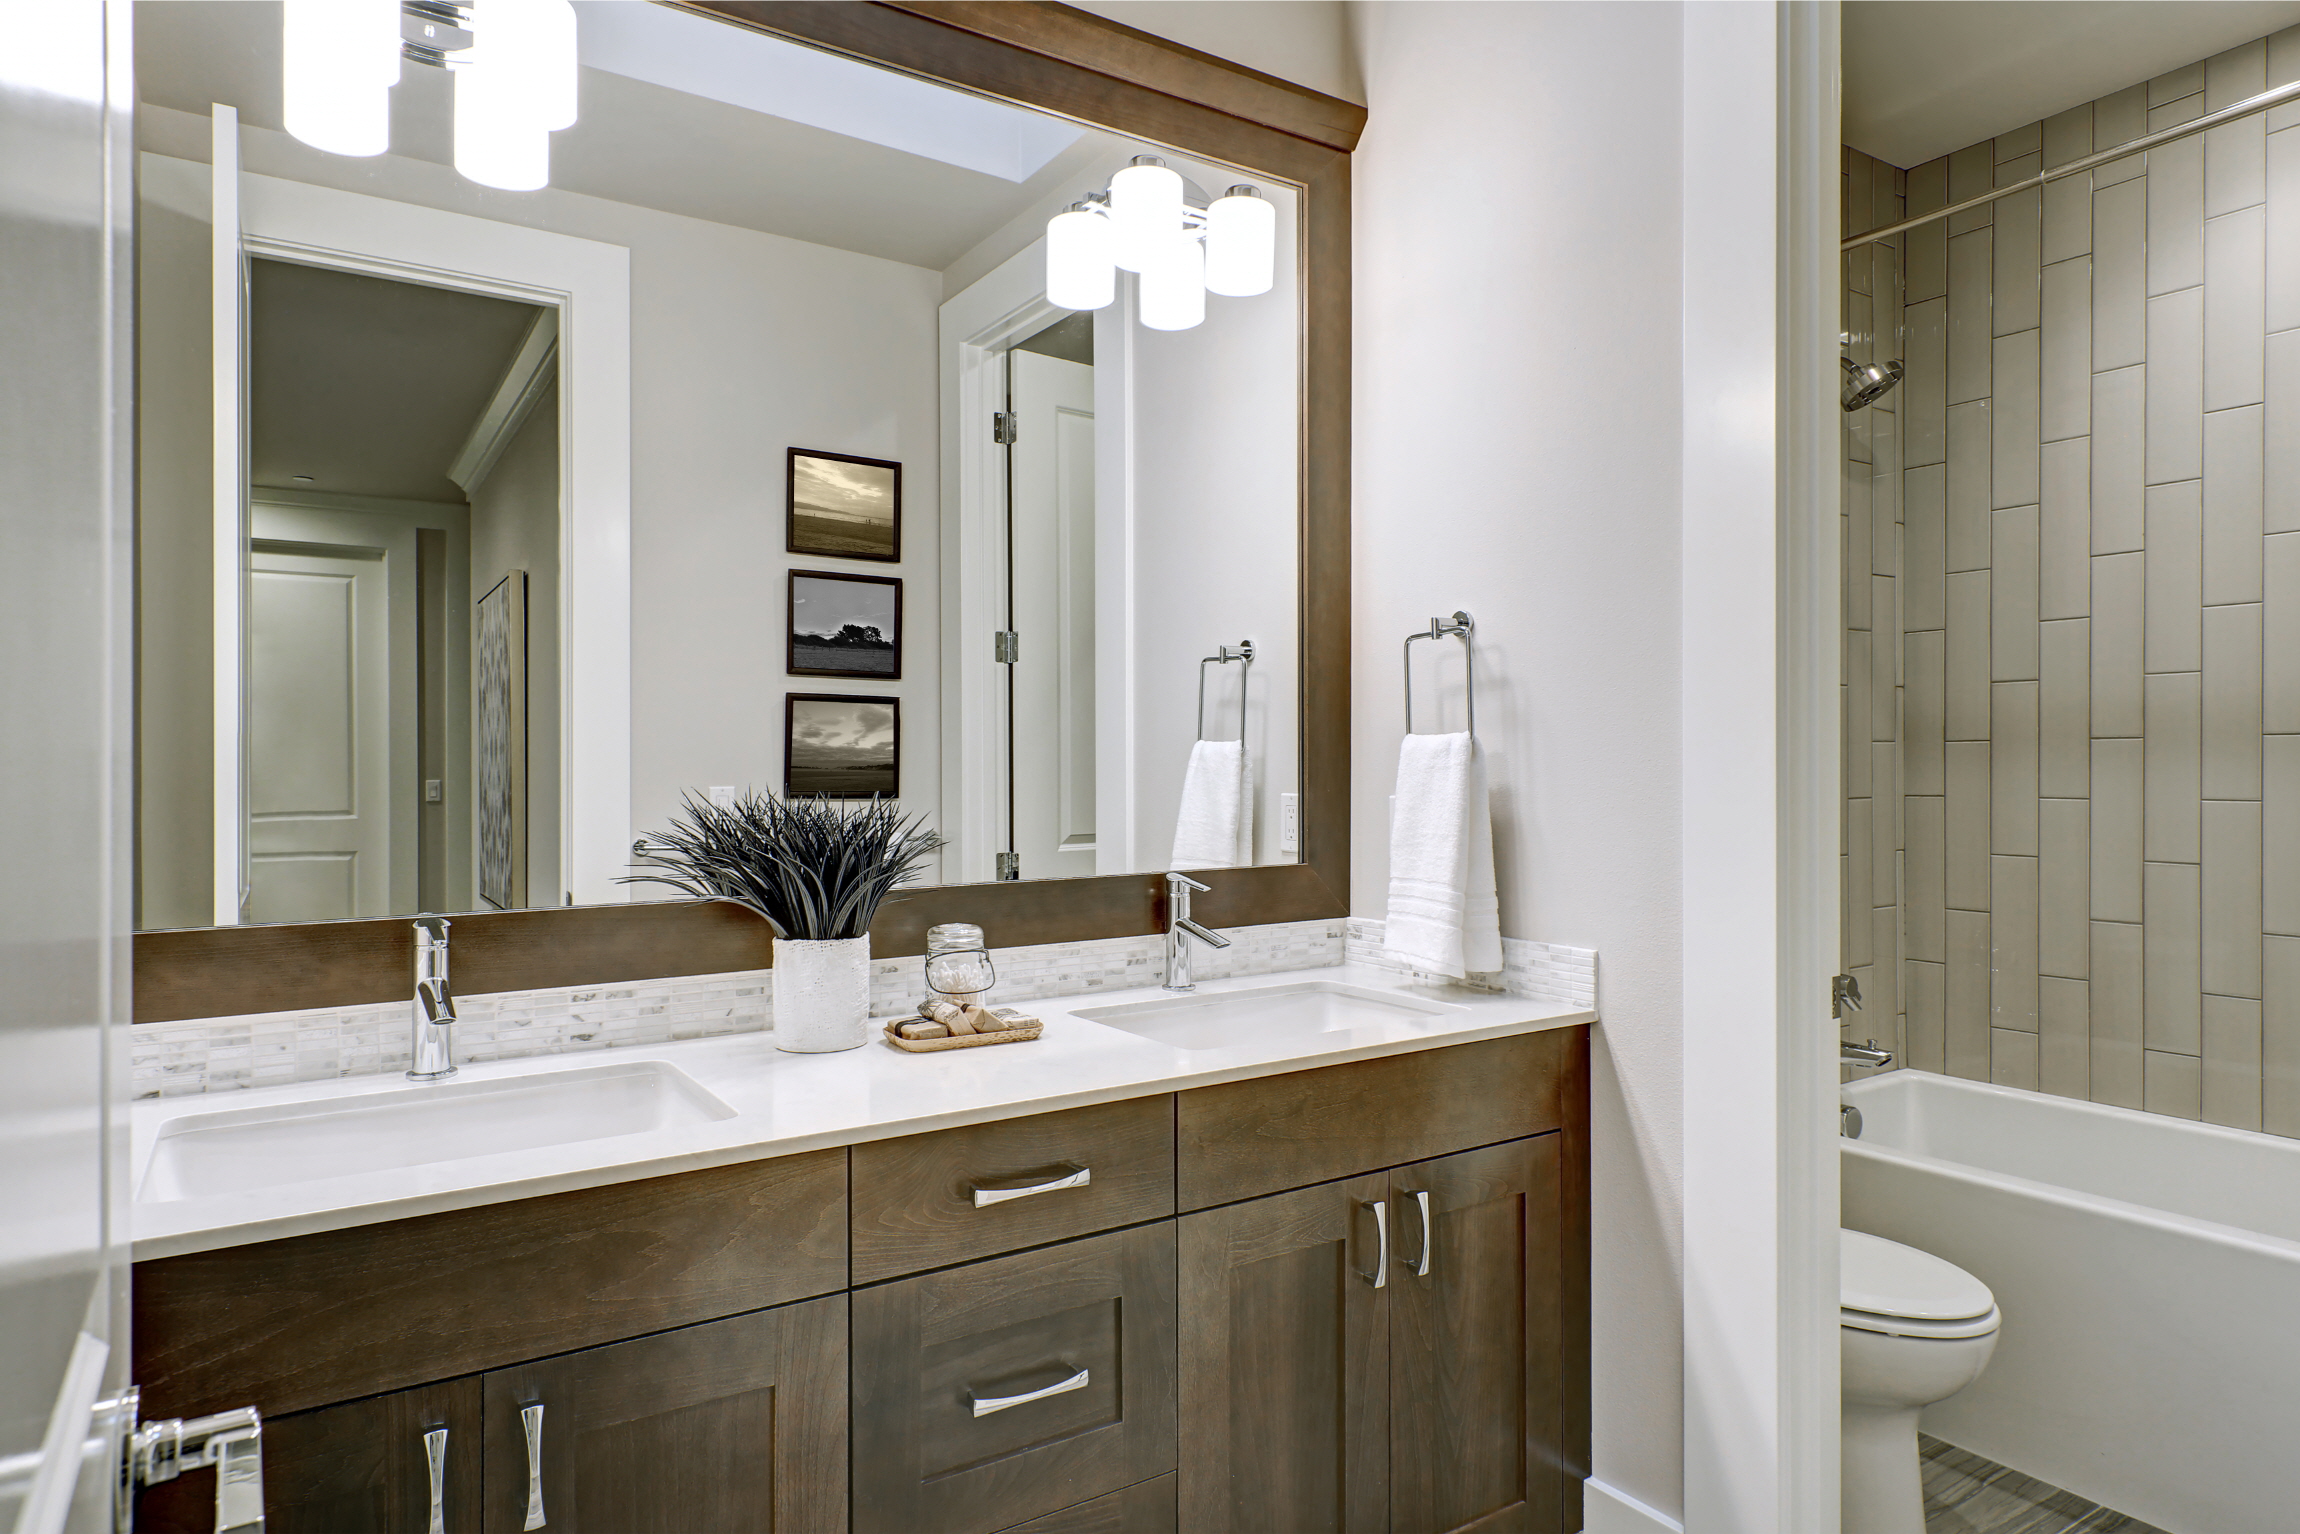 Add warmth to your bathroom with wood accents like a vanity or mirror frame, choosing rich tones for coziness.